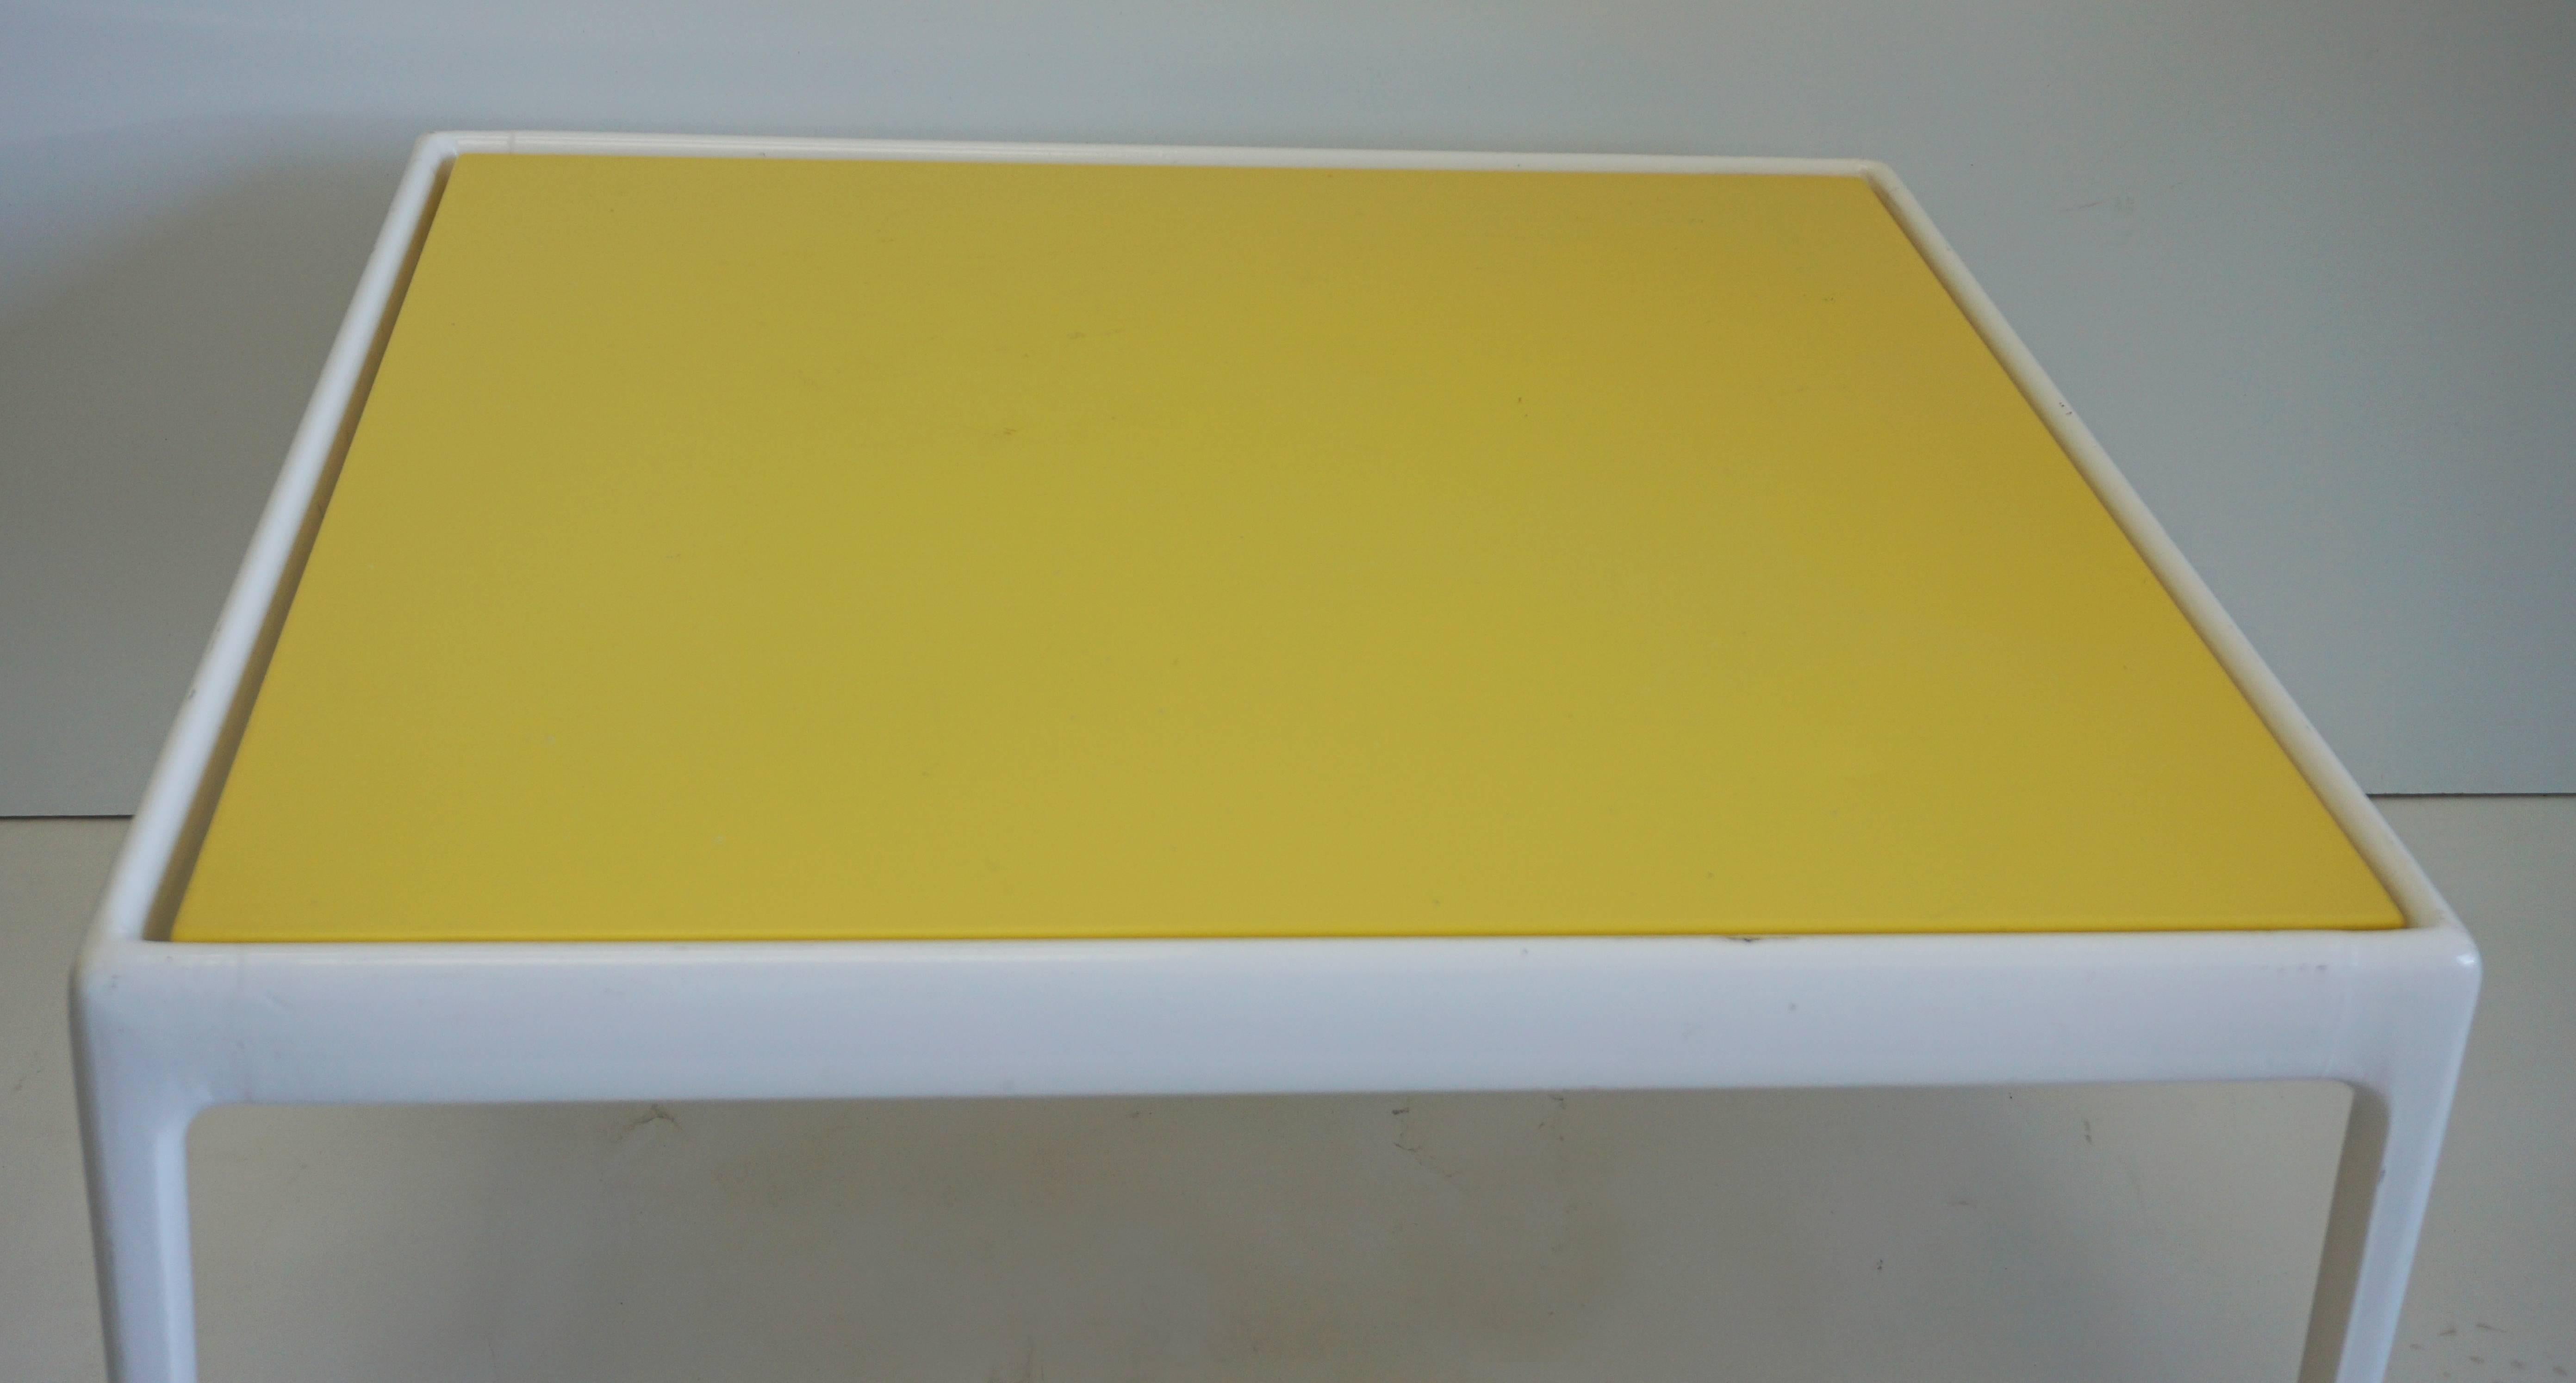 Richard Schultz 1966 collection square table.

Yellow enamel top.

This color is out of production.

There are some chips and blemishes. See photos.